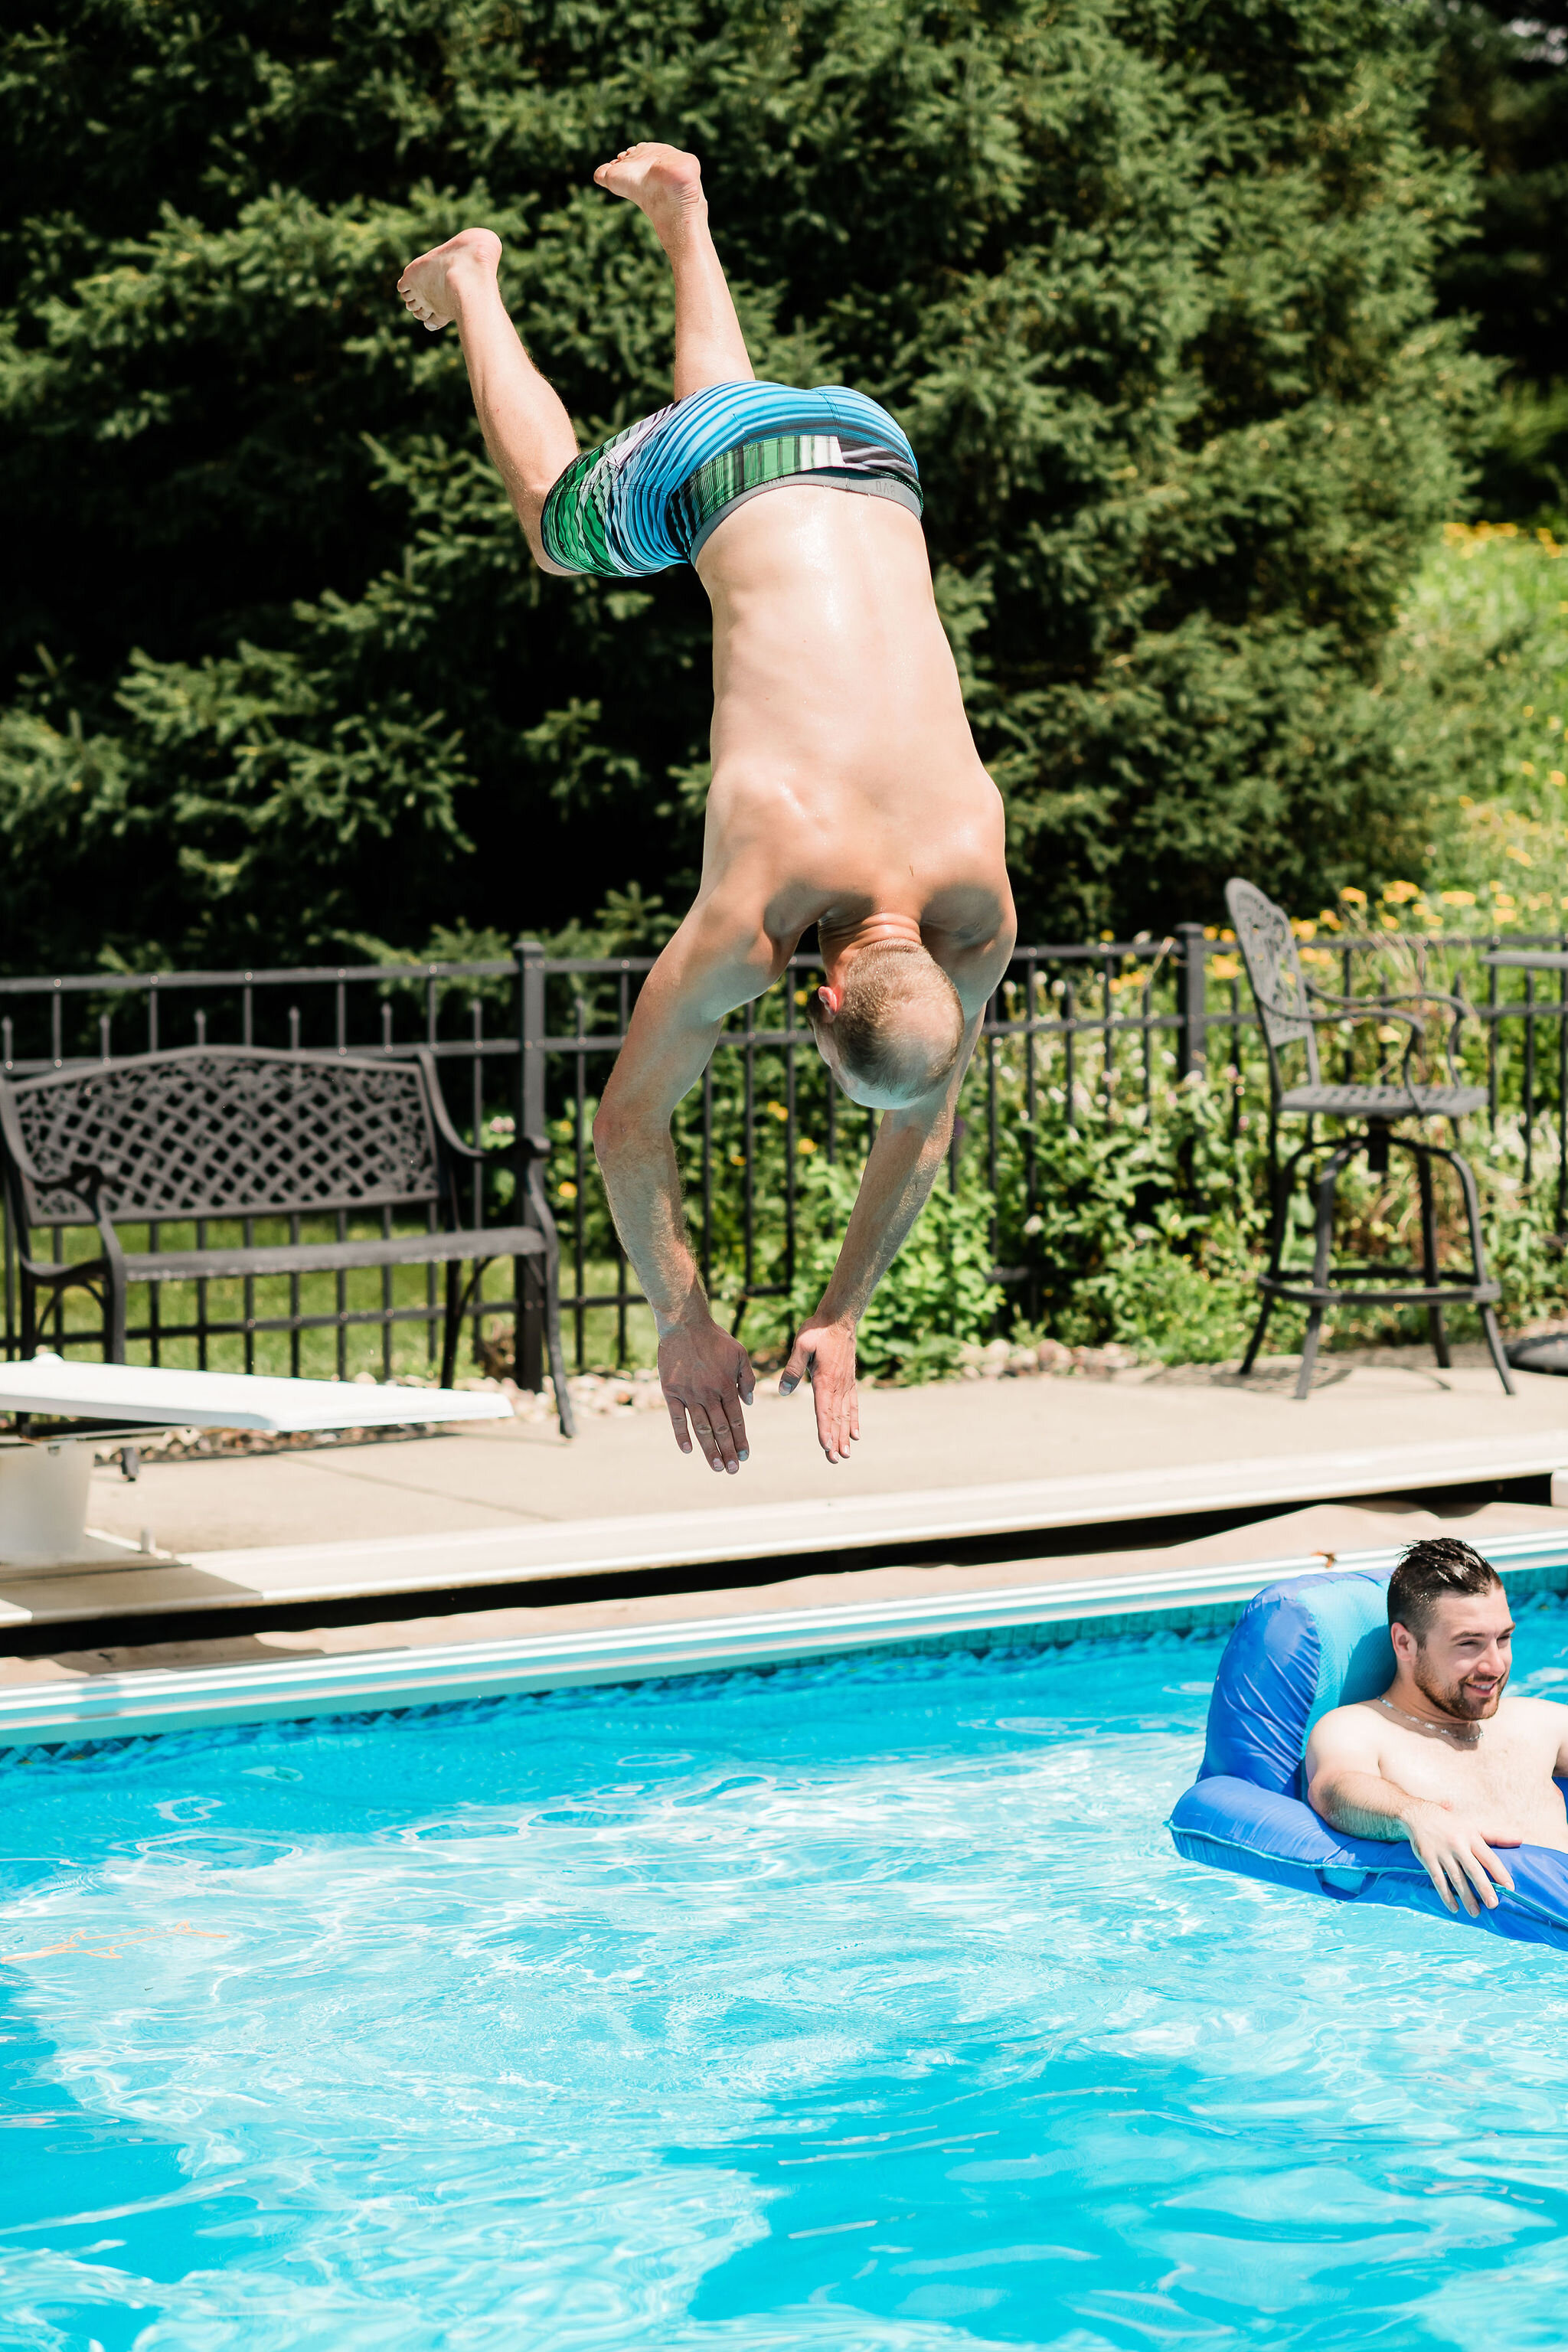 Groomsman diving into a pool